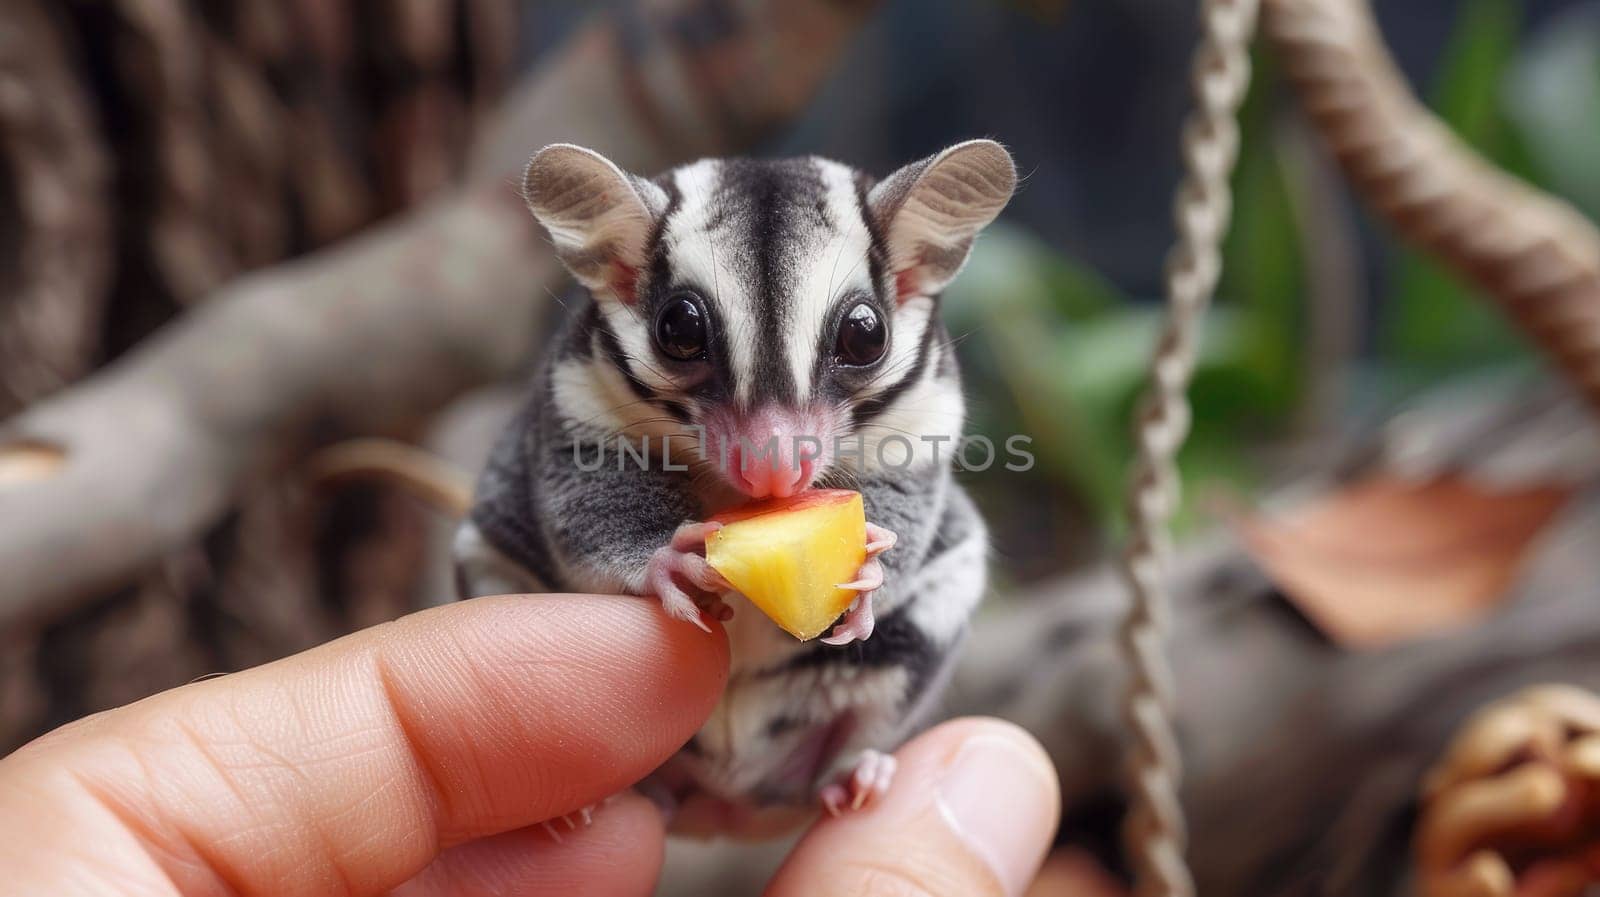 A close-up shot of a sugar glider perched on a finger, its tiny hands gripping a piece of fruit. by Chawagen